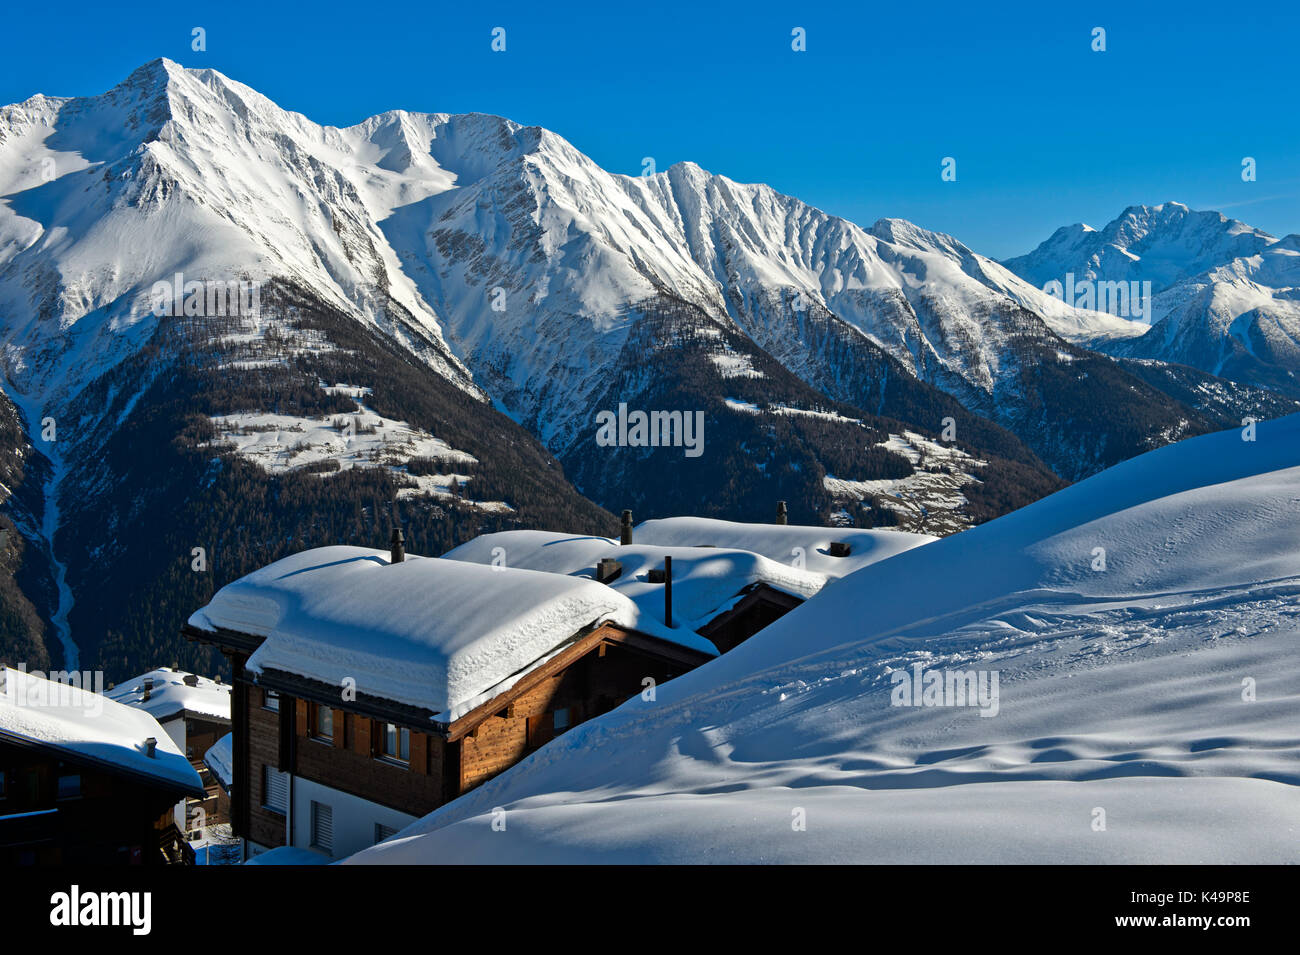 Snow-Covered Mountain Peaks And Chalets During Winter In The Mountain Village Bettmeralp, Valais, Switzerland Stock Photo